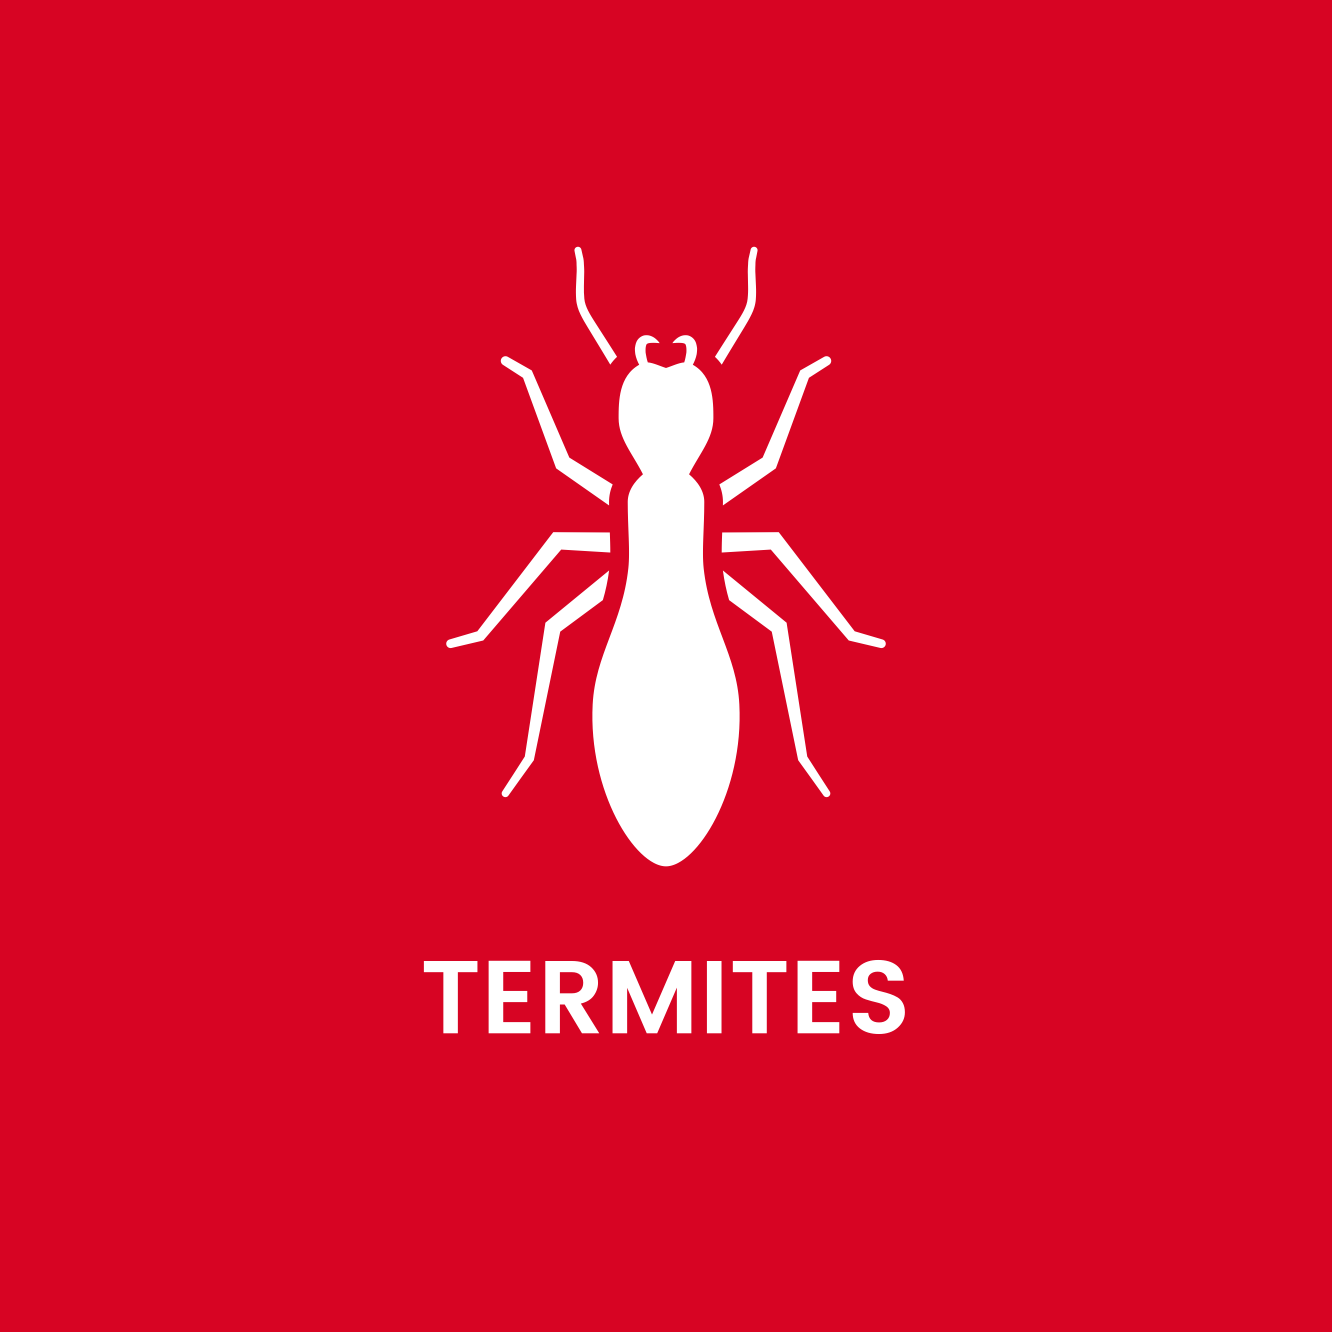 A white termite icon on a red background with the word termites below it.